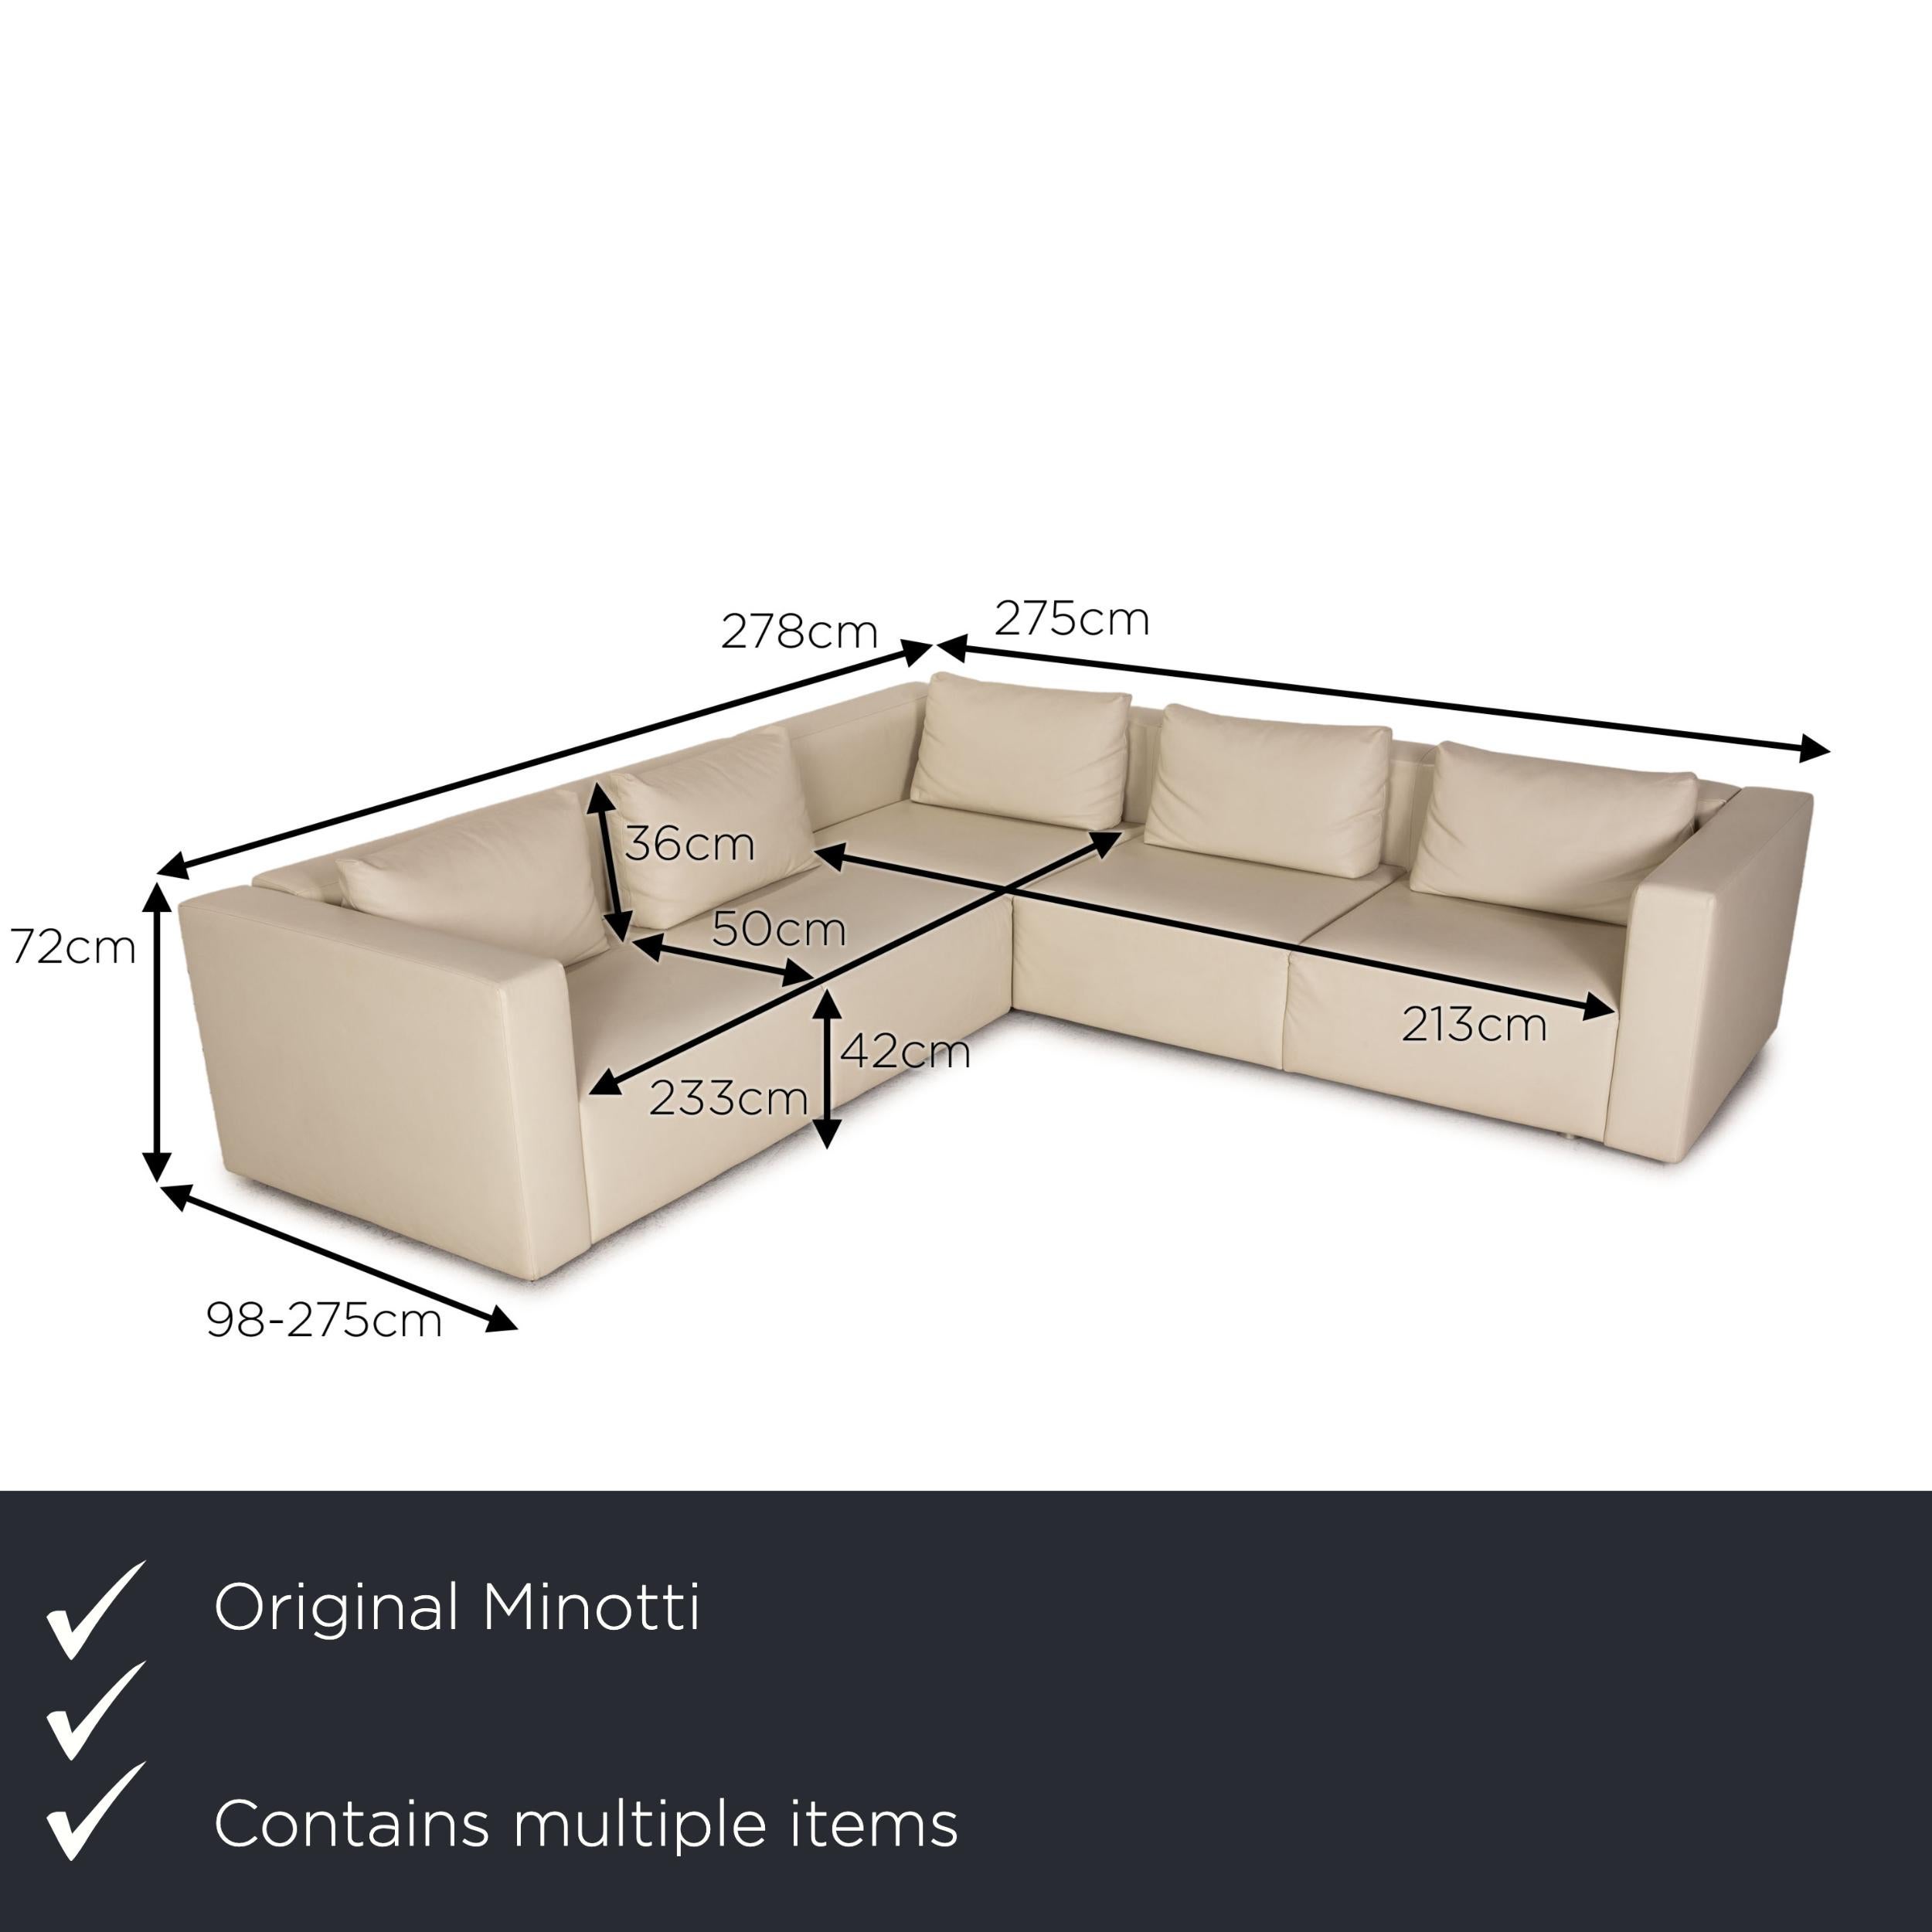 We present to you a Minotti leather sofa set cream corner sofa ottoman.

Product measurements in centimeters:

depth: 98
width: 278
height: 72
seat height: 42
rest height: 68
seat depth: 50
seat width: 213
back height: 36.

 